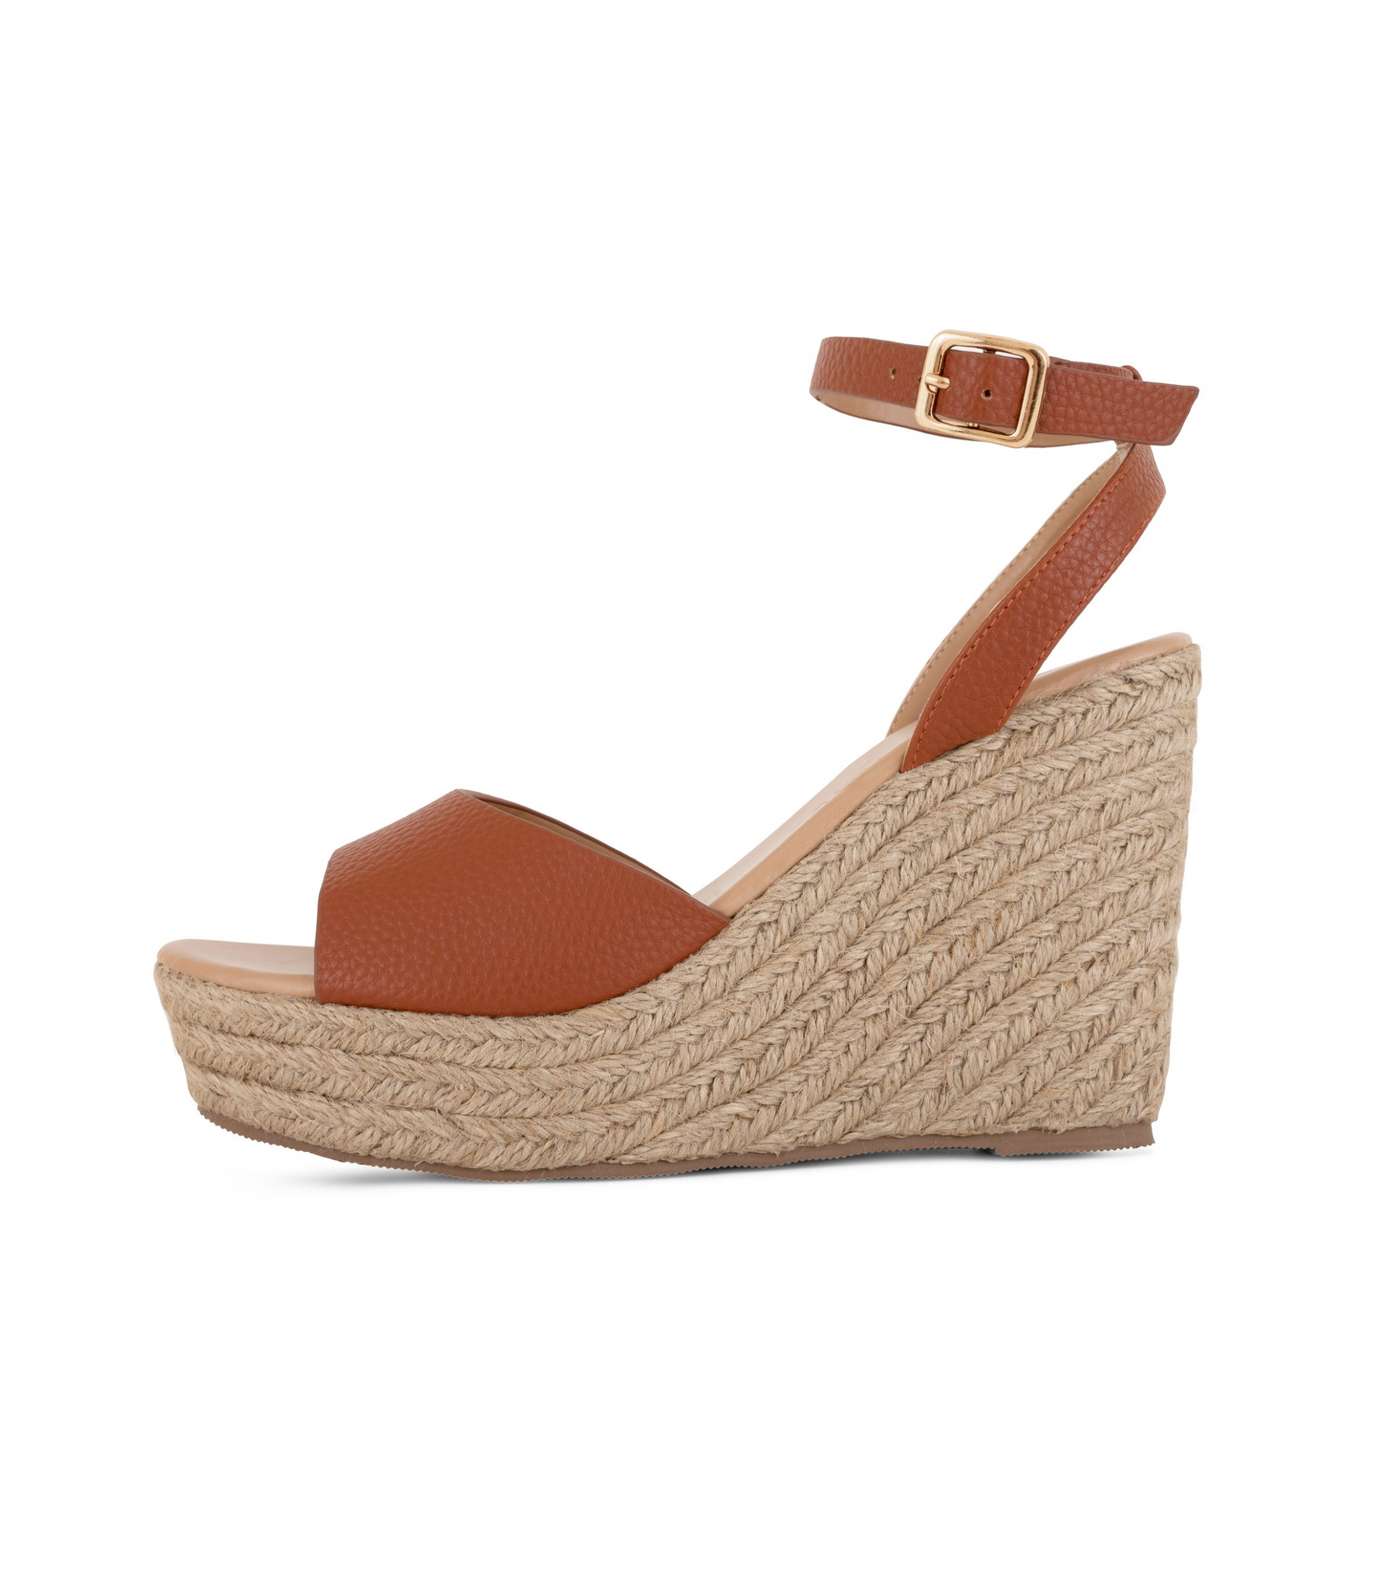 South Beach Tan Leather-Look Espadrille Wedge Sandals Image 2